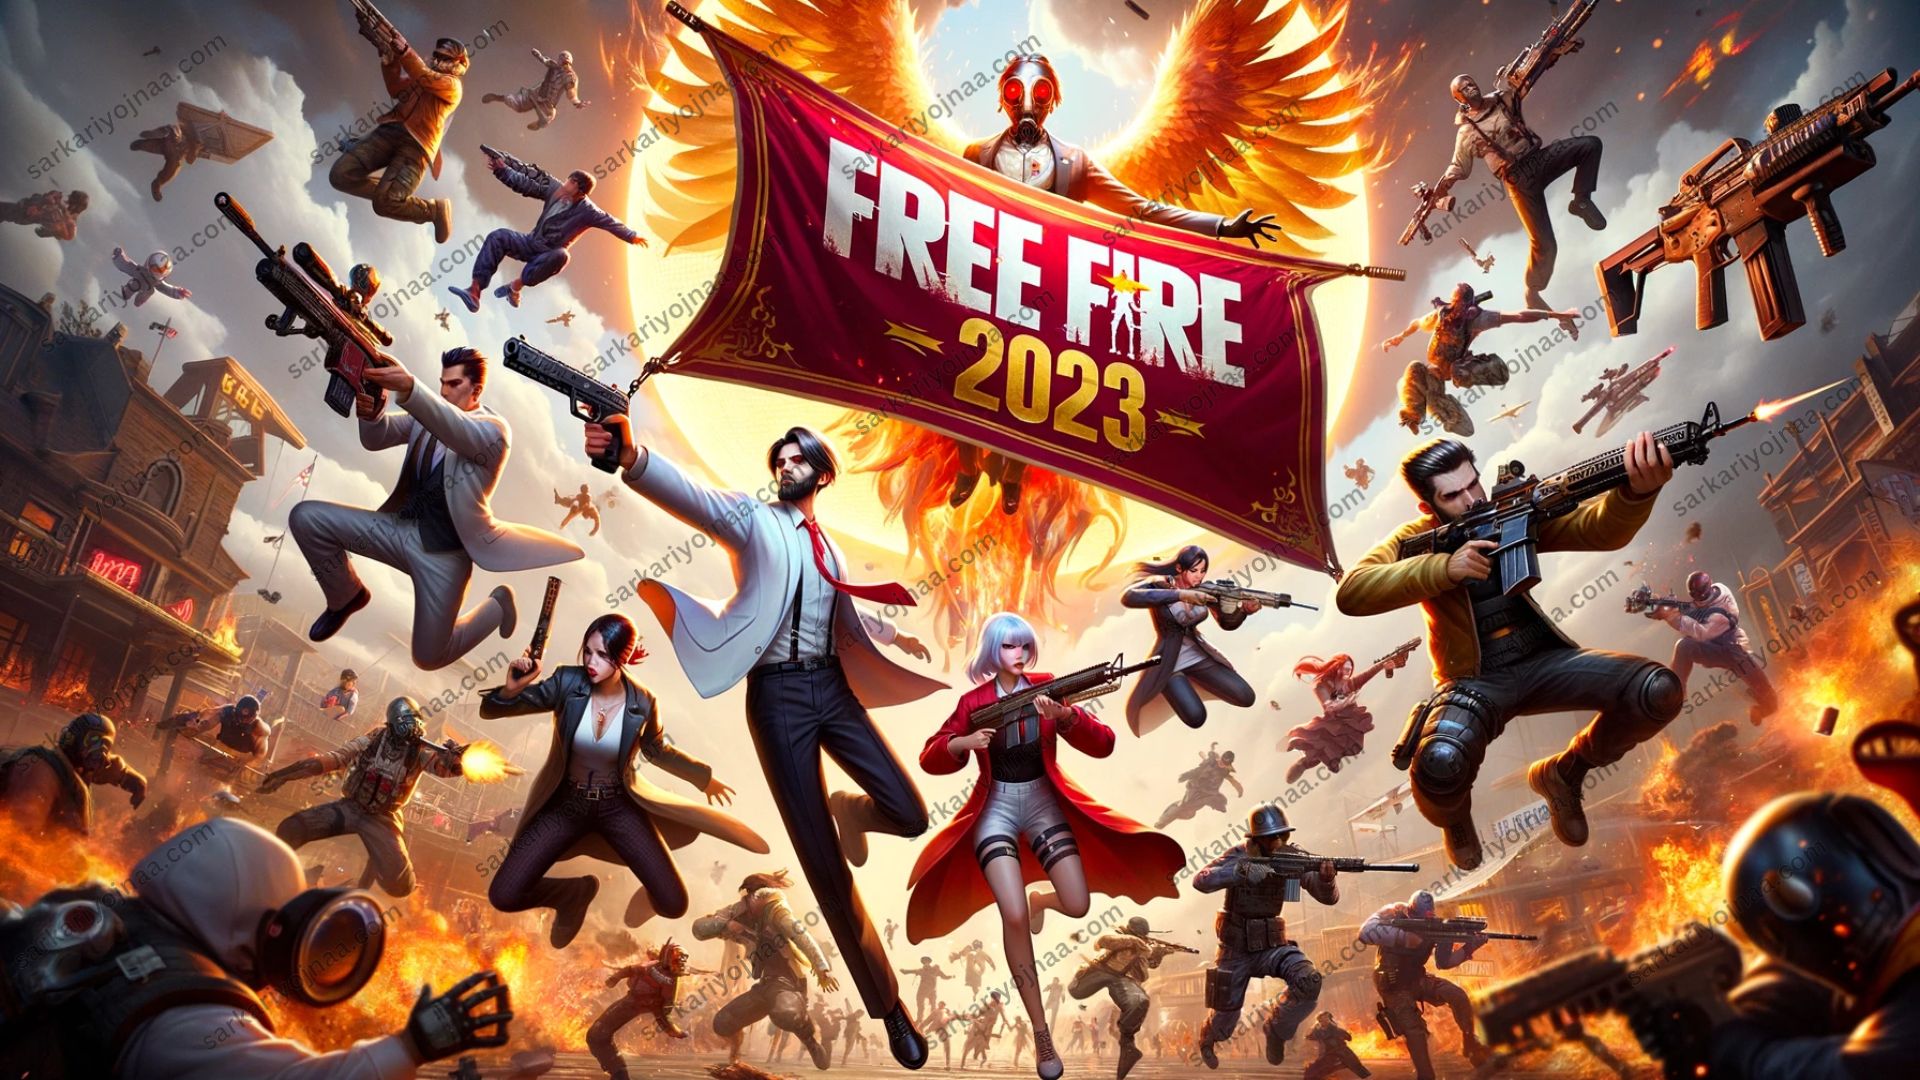 FREE FIRE PLAY STORE MEIN KAB AAYEGA